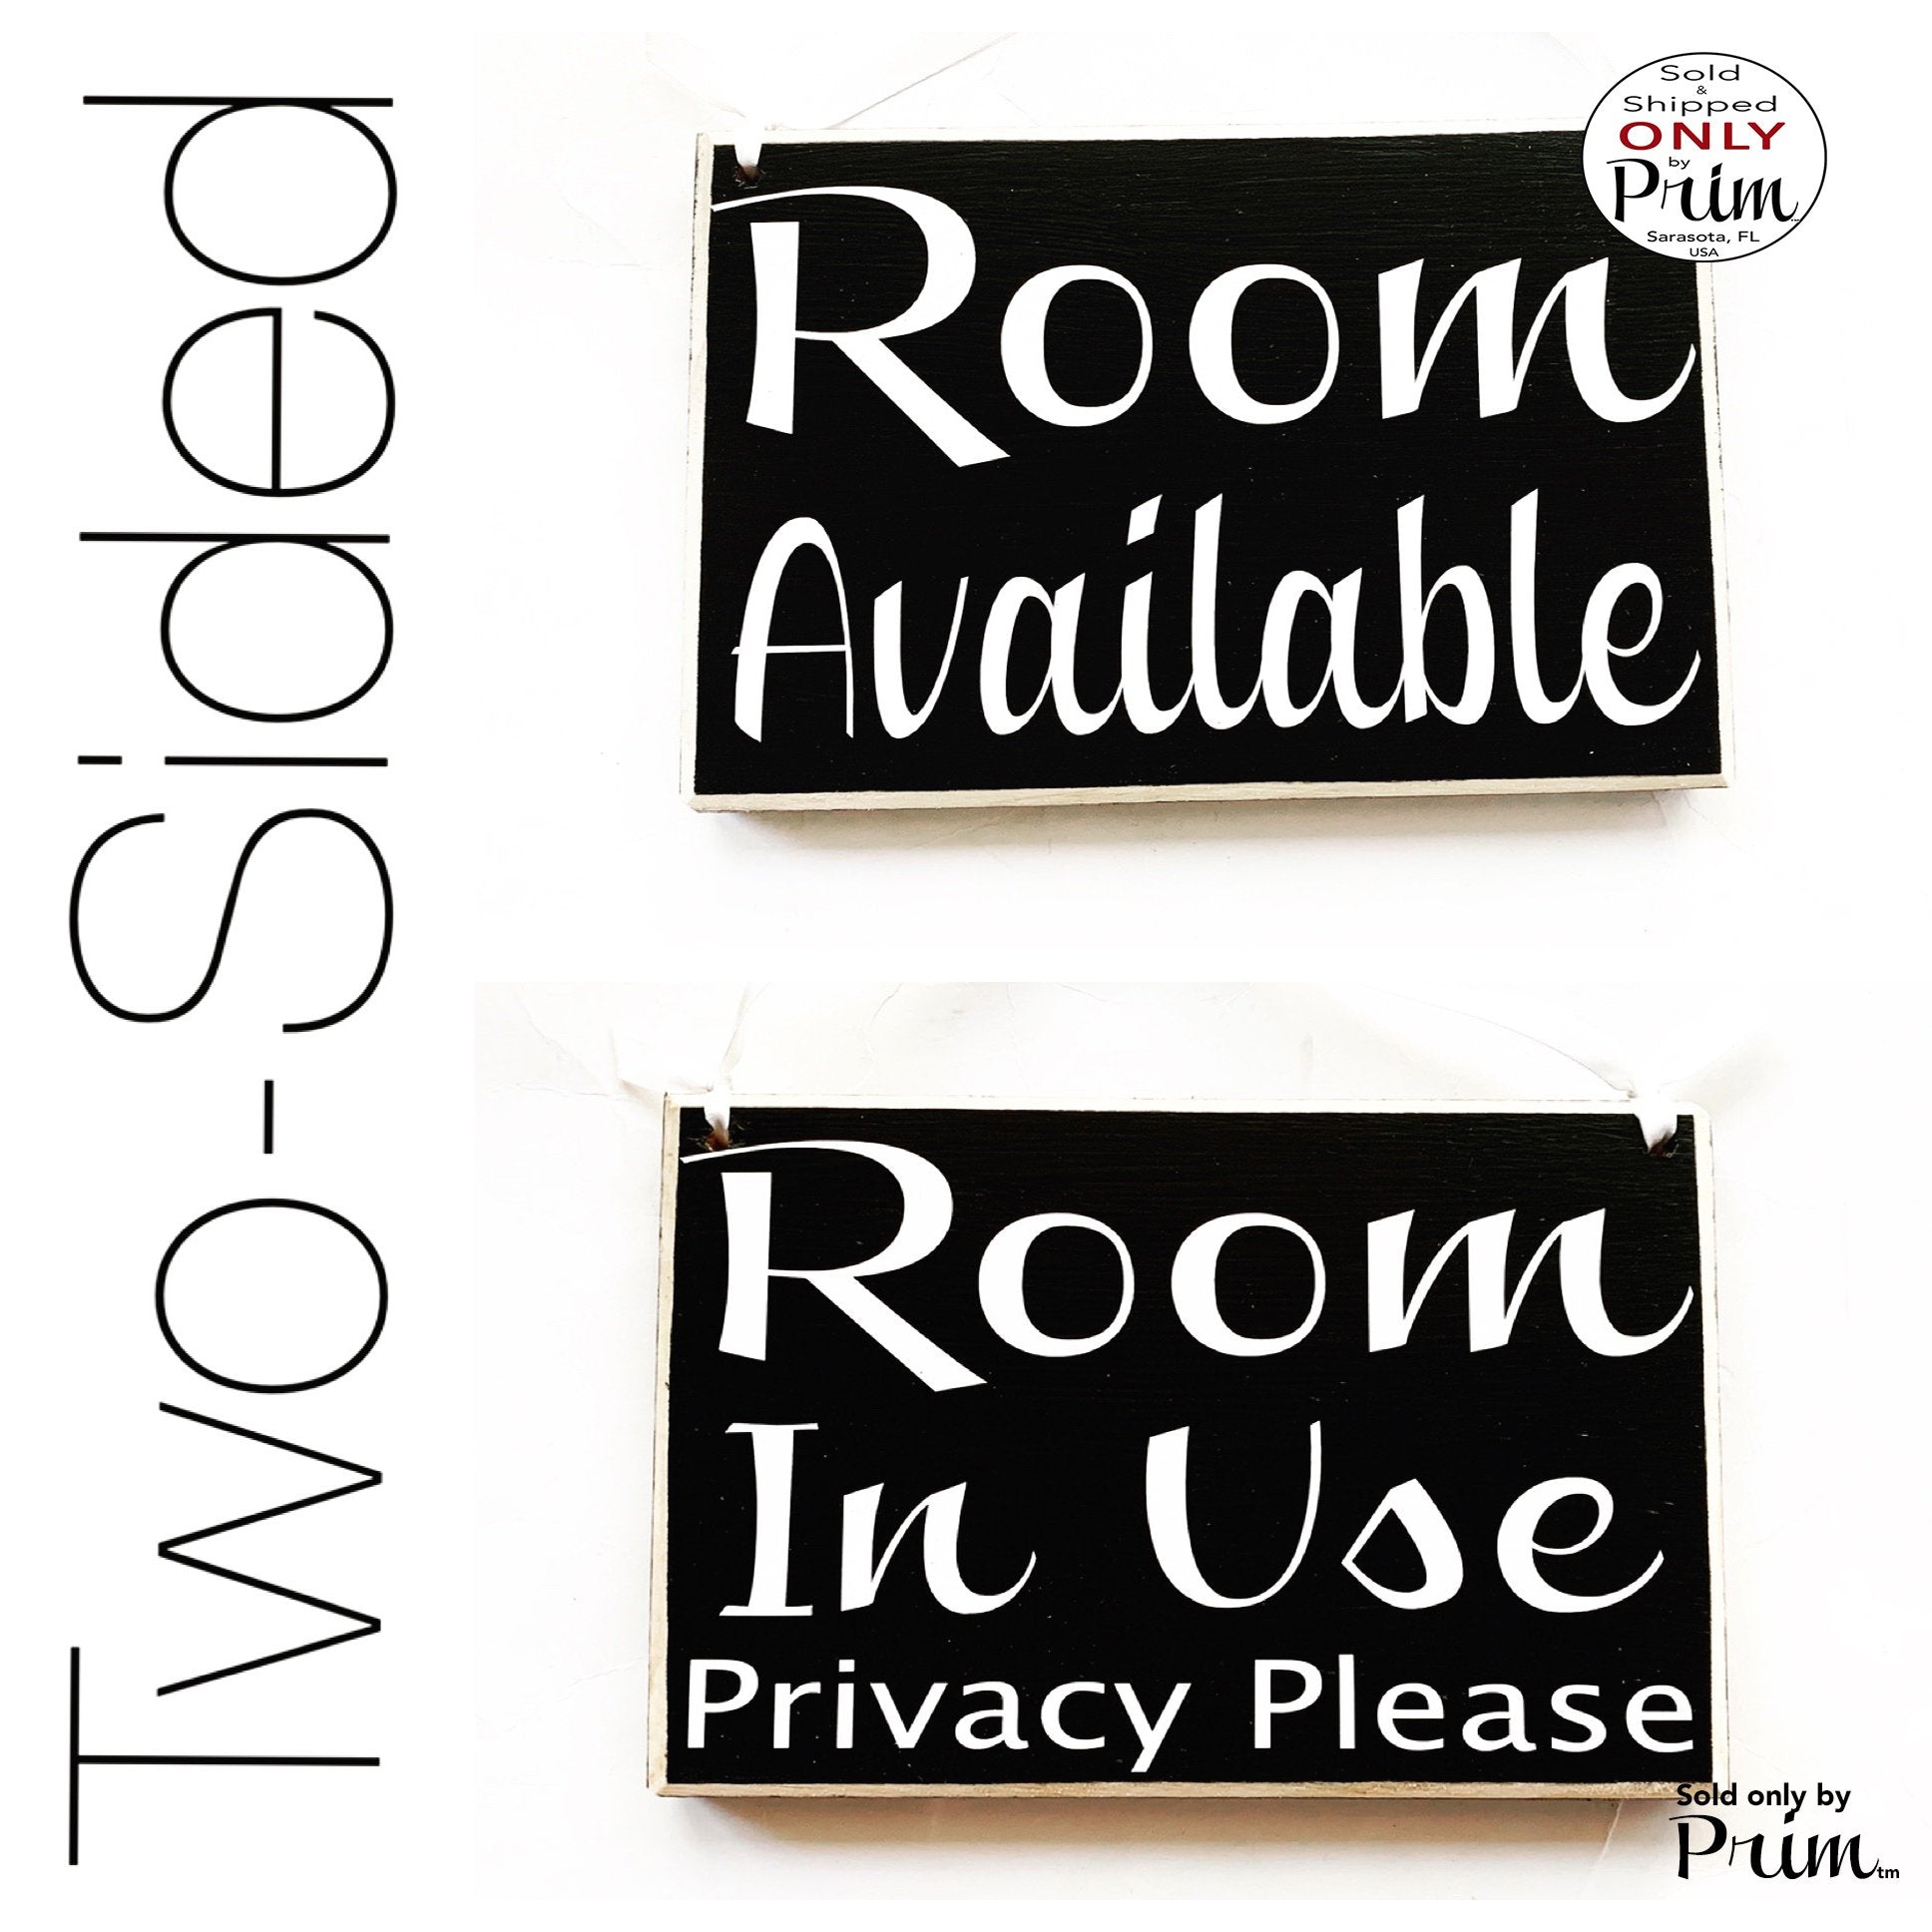 8x6 Room Available Room In Use Privacy Please Custom Wood Sign | Spa Salon Office Business No Entry Do Not Disturb In Session Door Plaque